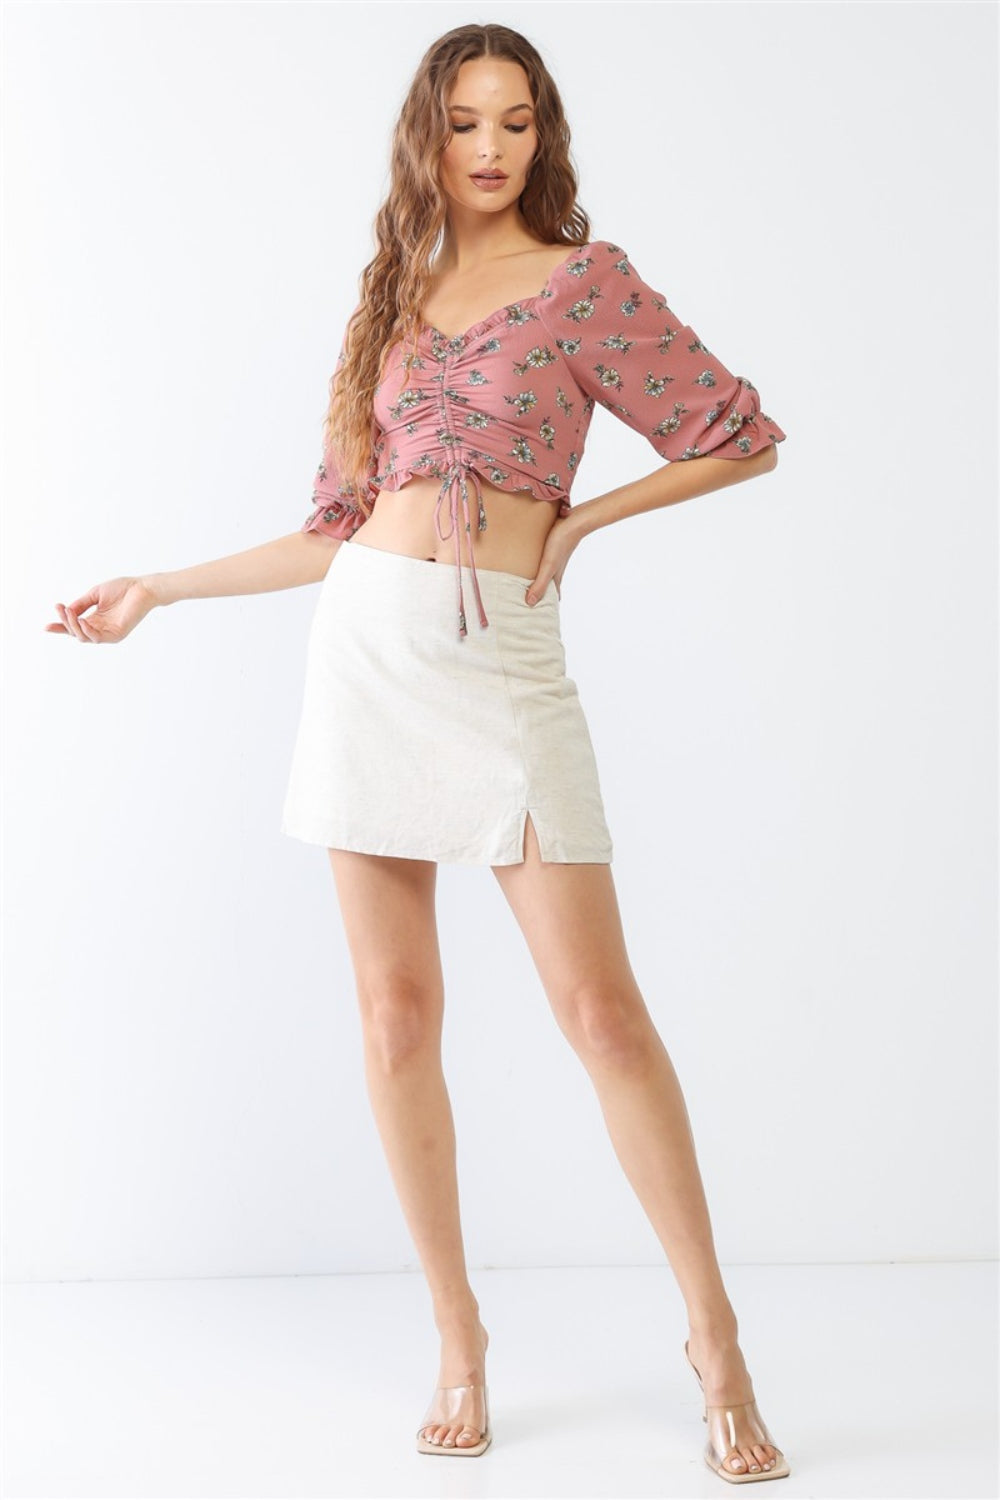 STUNNLY  Tasha Apparel Floral Ruffle Smocked Back Ruched Crop Top   